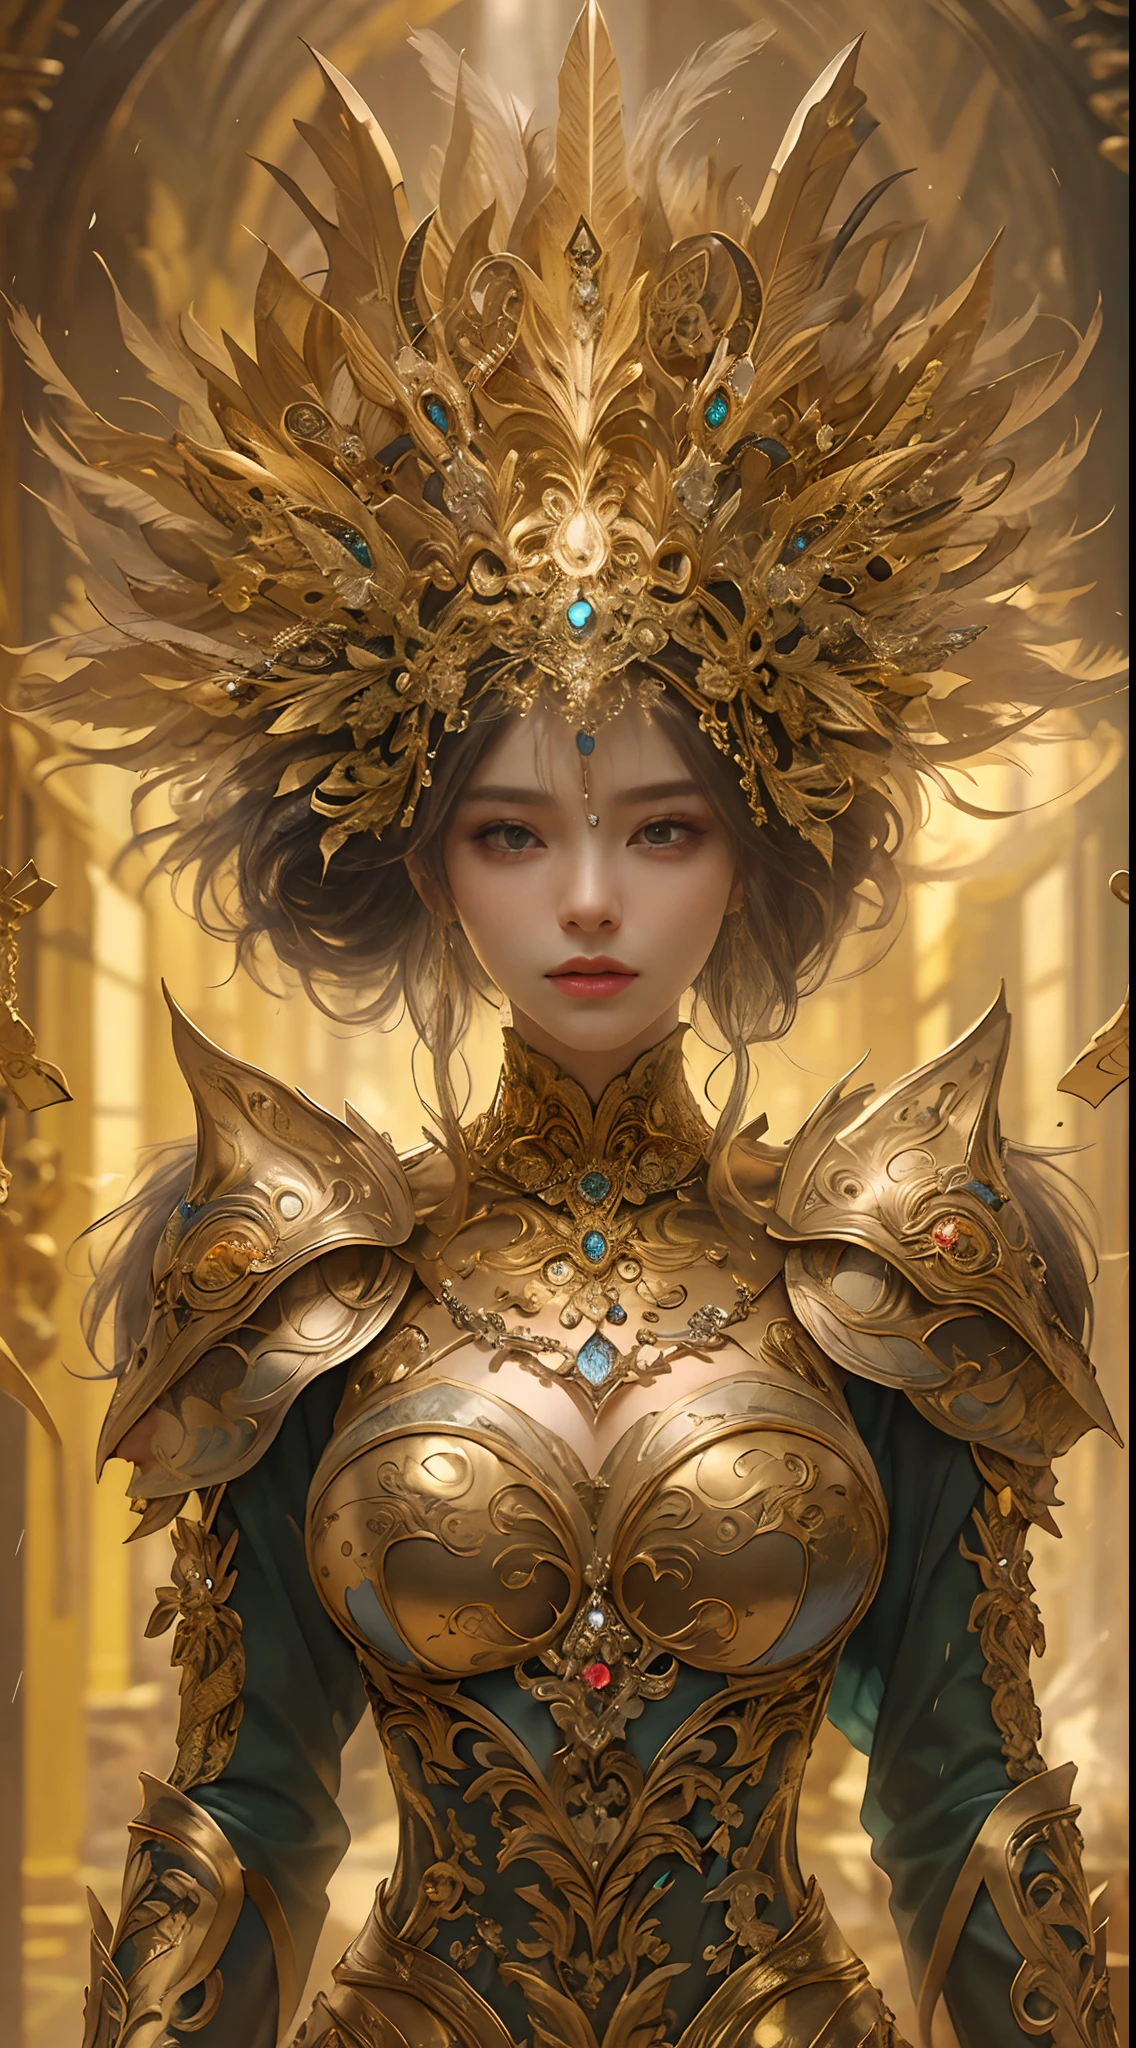 Woman in gold dress, Real Art Station, Heavy rain scene, detailed fantasy art, Stunning character art, Beautiful exquisite character art, Beautiful gold armor, Extremely detailed, Girl in Shining Armor, Exquisite Intricate Headdress and Jewelry, Full body capture,